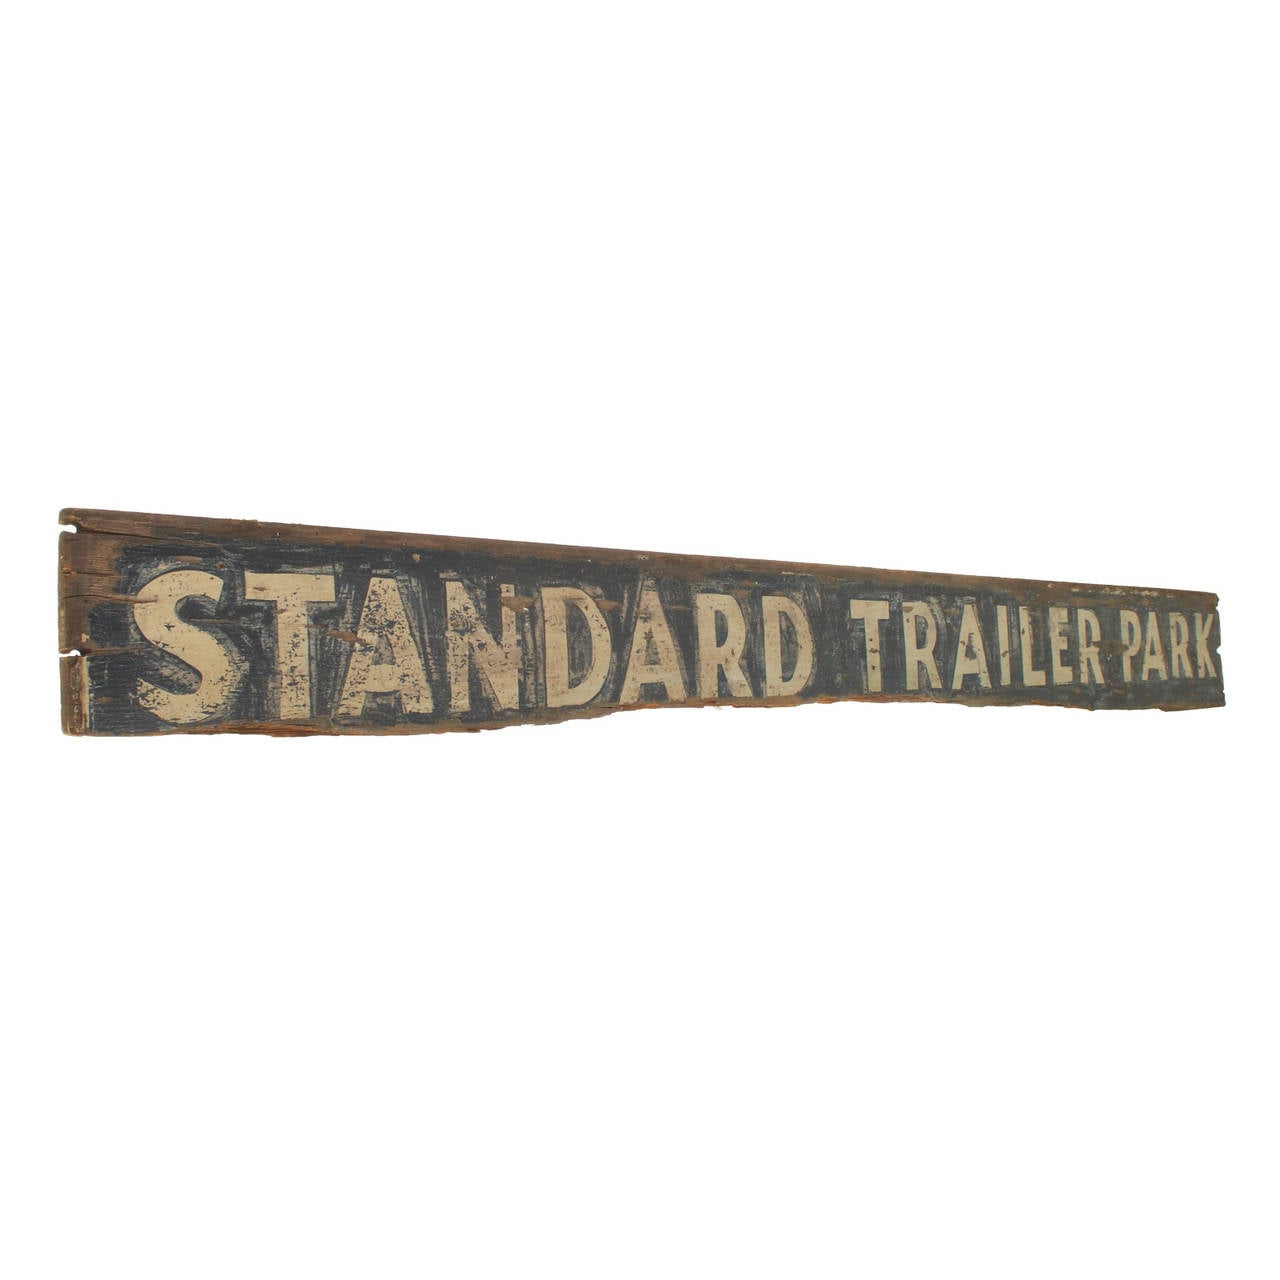 This is a wonderful old sign for the Standard Trail Park in Somewhere, USA. This was made from one 10' long wood board and is all hand painted. Looking closely you can see the years of repainting as well as its original old finish, aged to